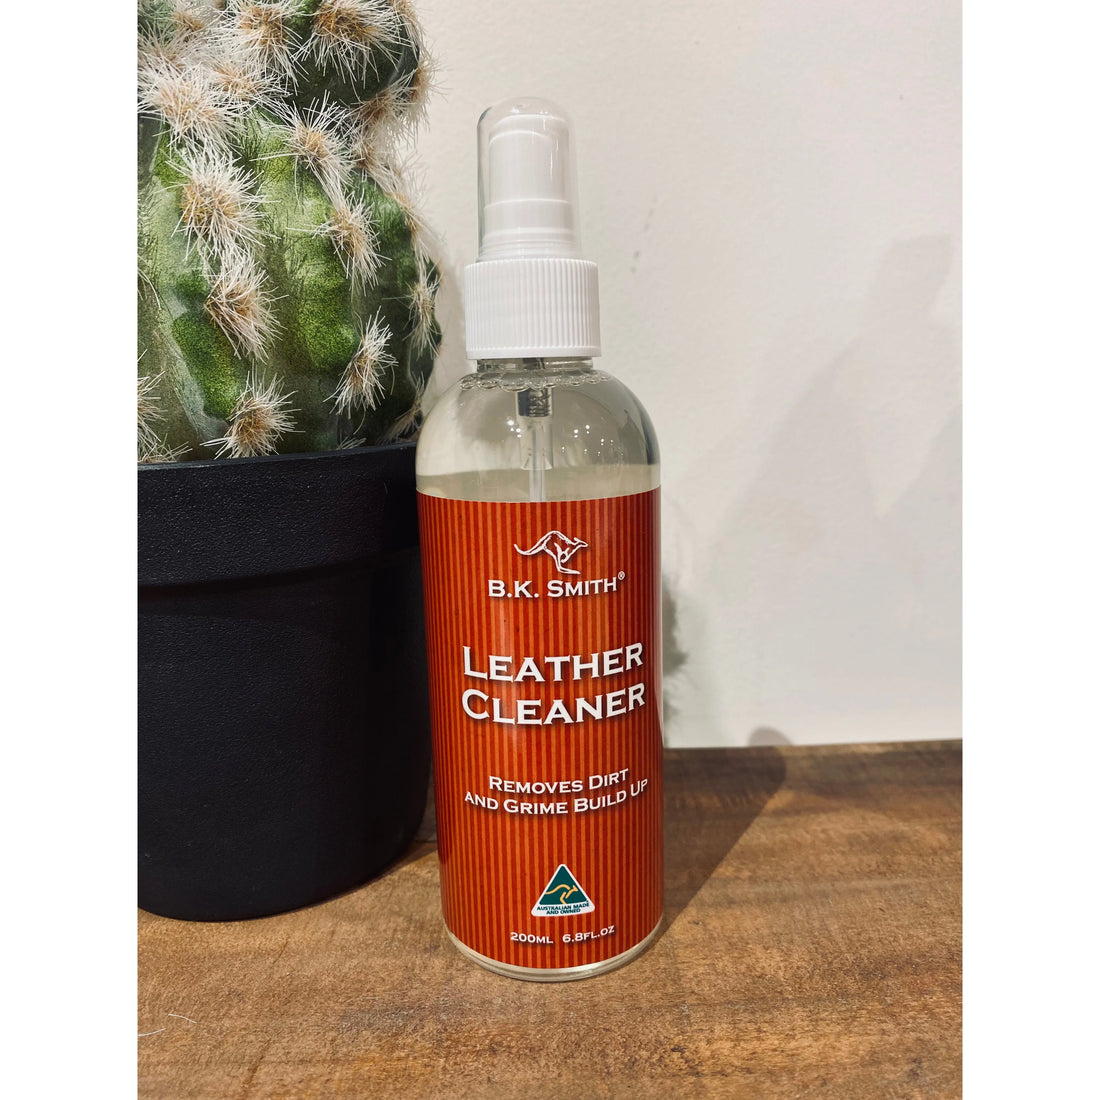 B.K. Smith Leather Cleaner 200m